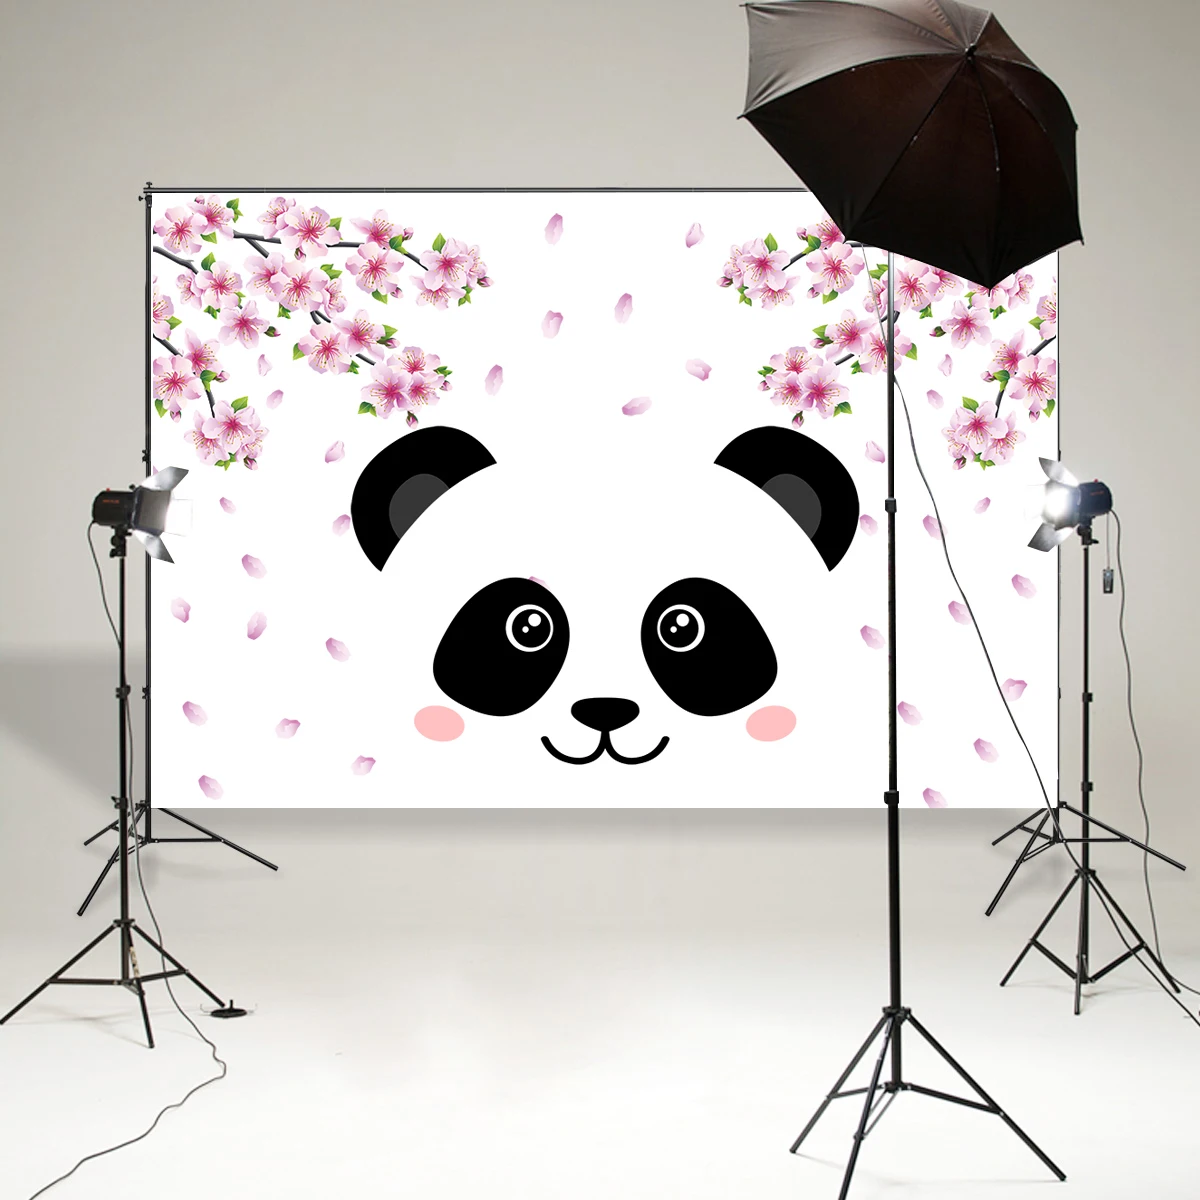 Girl Cute Panda Themed Birthday Party Backdrop Photo Booth Background Home  Decor Wallpaper Vinyl Poster Picture Baby Shower Prop - Backgrounds -  AliExpress